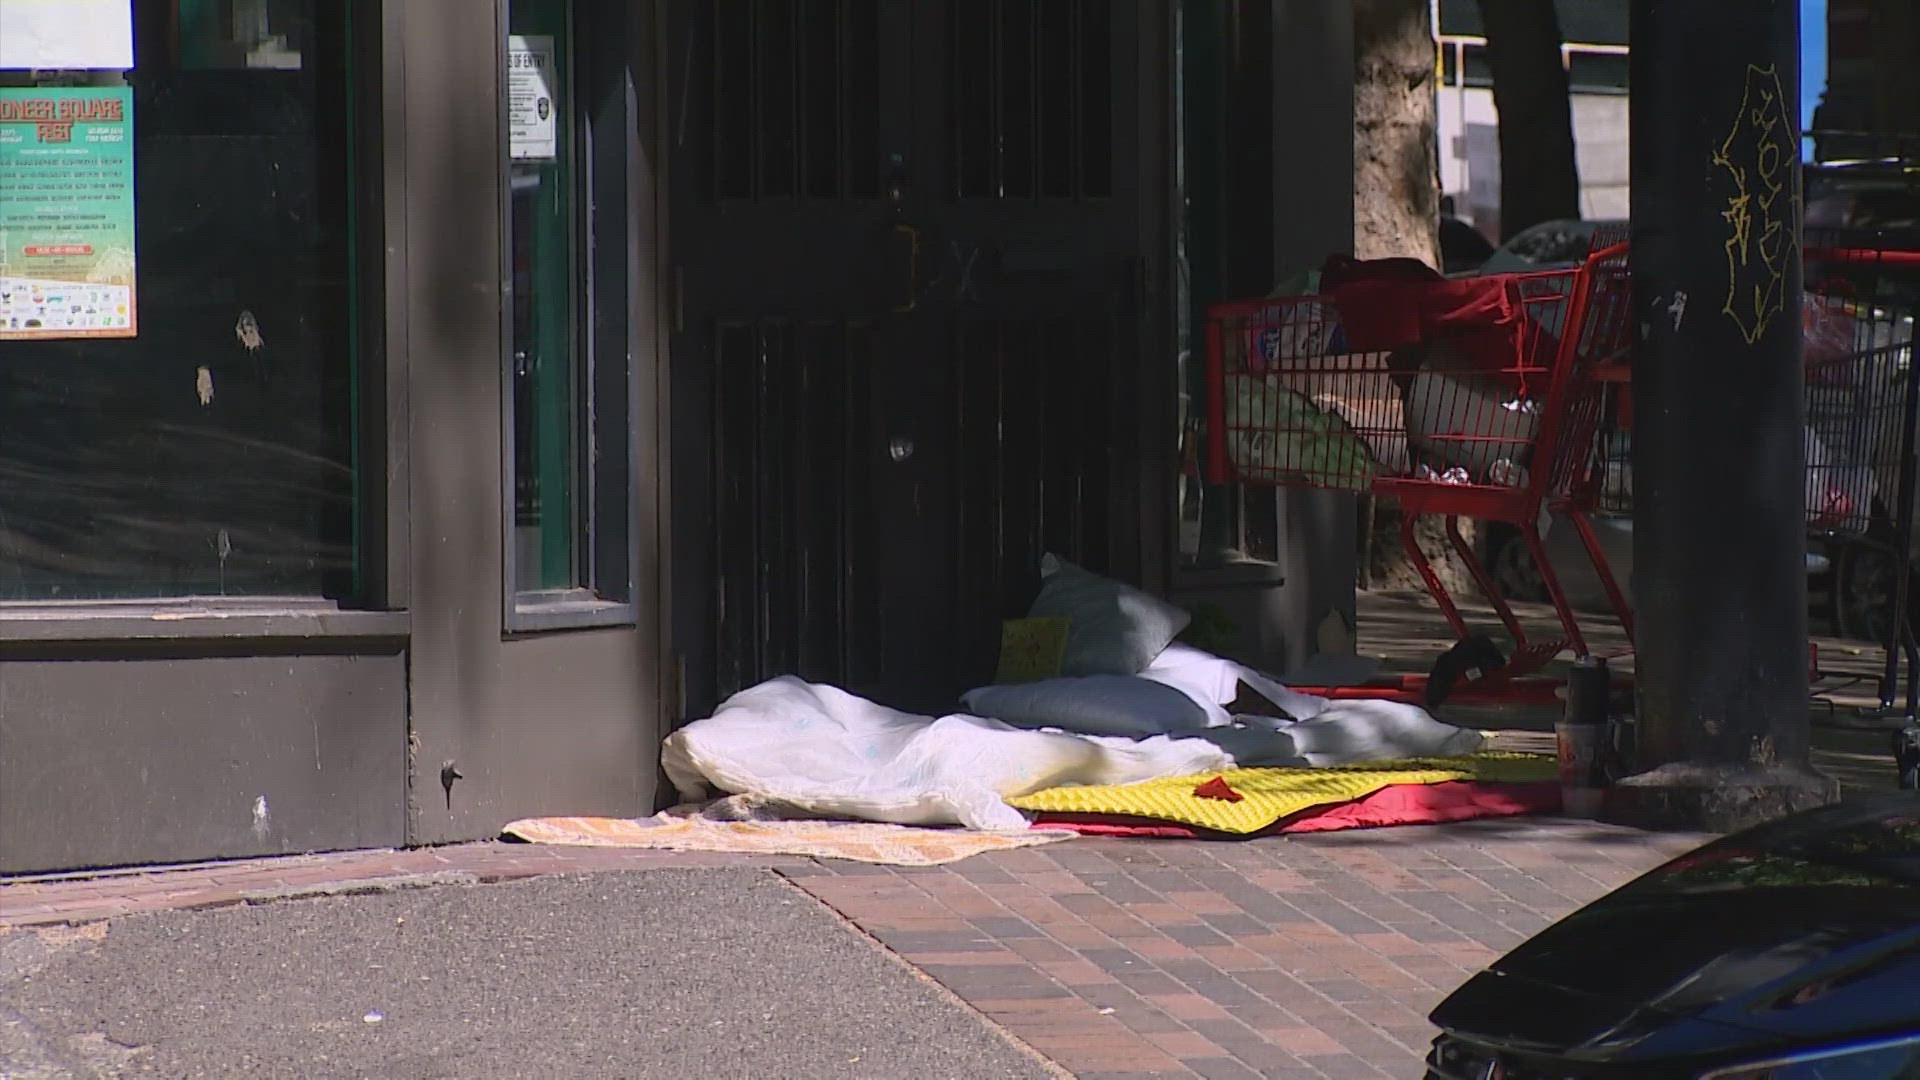 According to the King County Regional Homelessness Authority, there are more than 16,000 homeless people in the county, with 60% of them unsheltered.